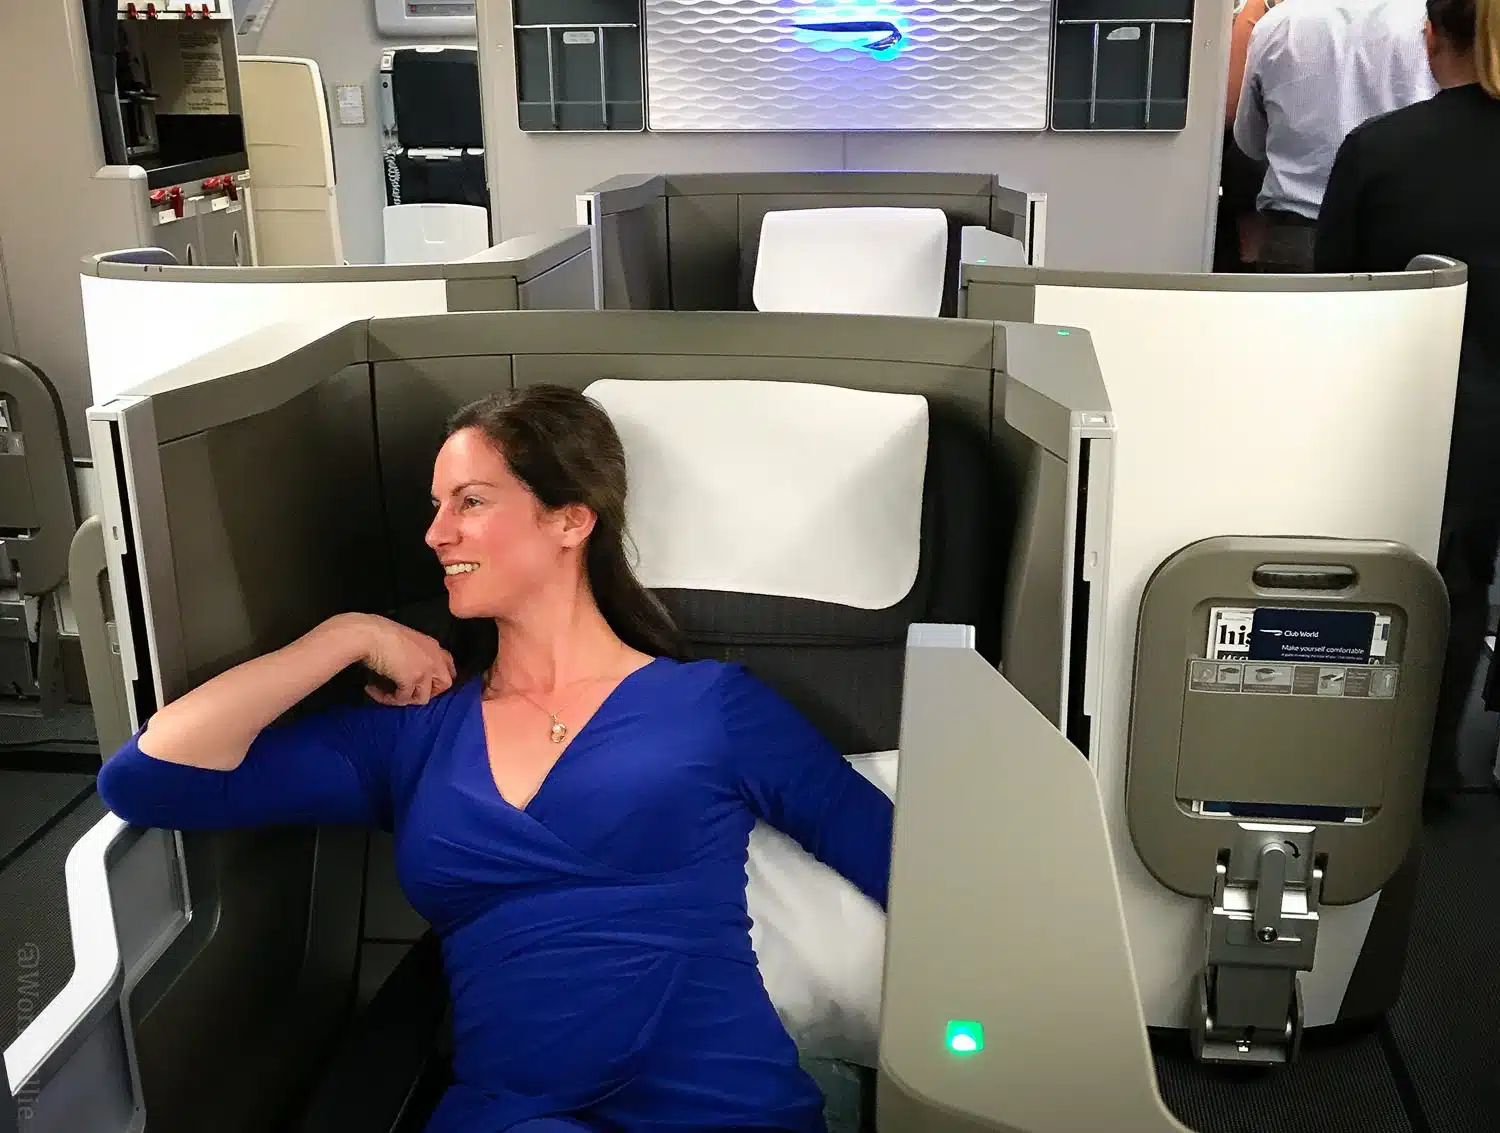 Fully reclining airplane seats and privacy walls?! Yes!